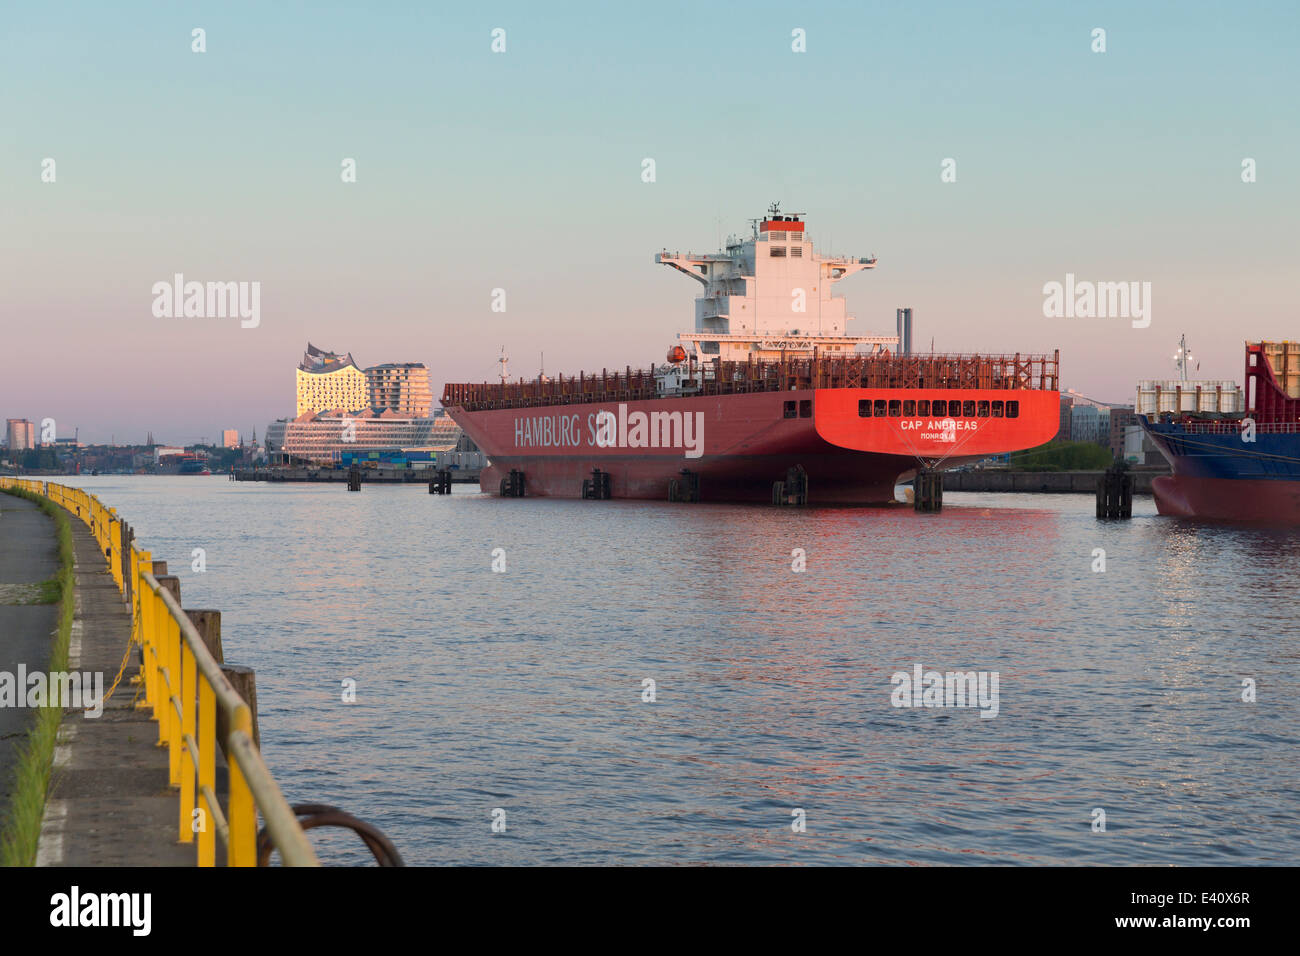 Germany, Hamburg, container ship on River Elbe with Elbphilharmonie in background Stock Photo